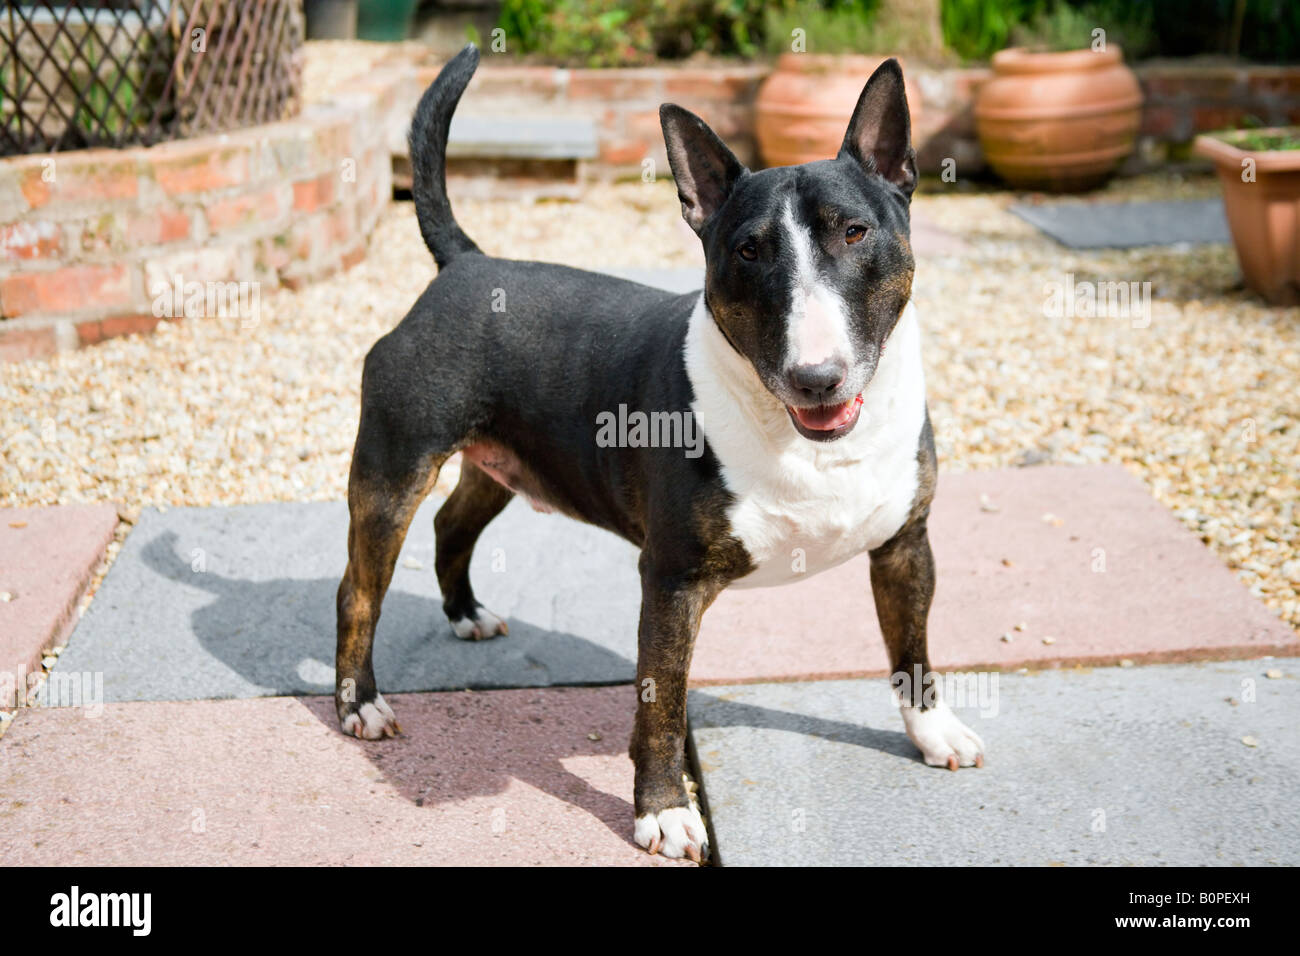 A male ^dog of the English Bull Terrier breed stood proudly in a garden with his mouth slightly open, looking alert. Stock Photo